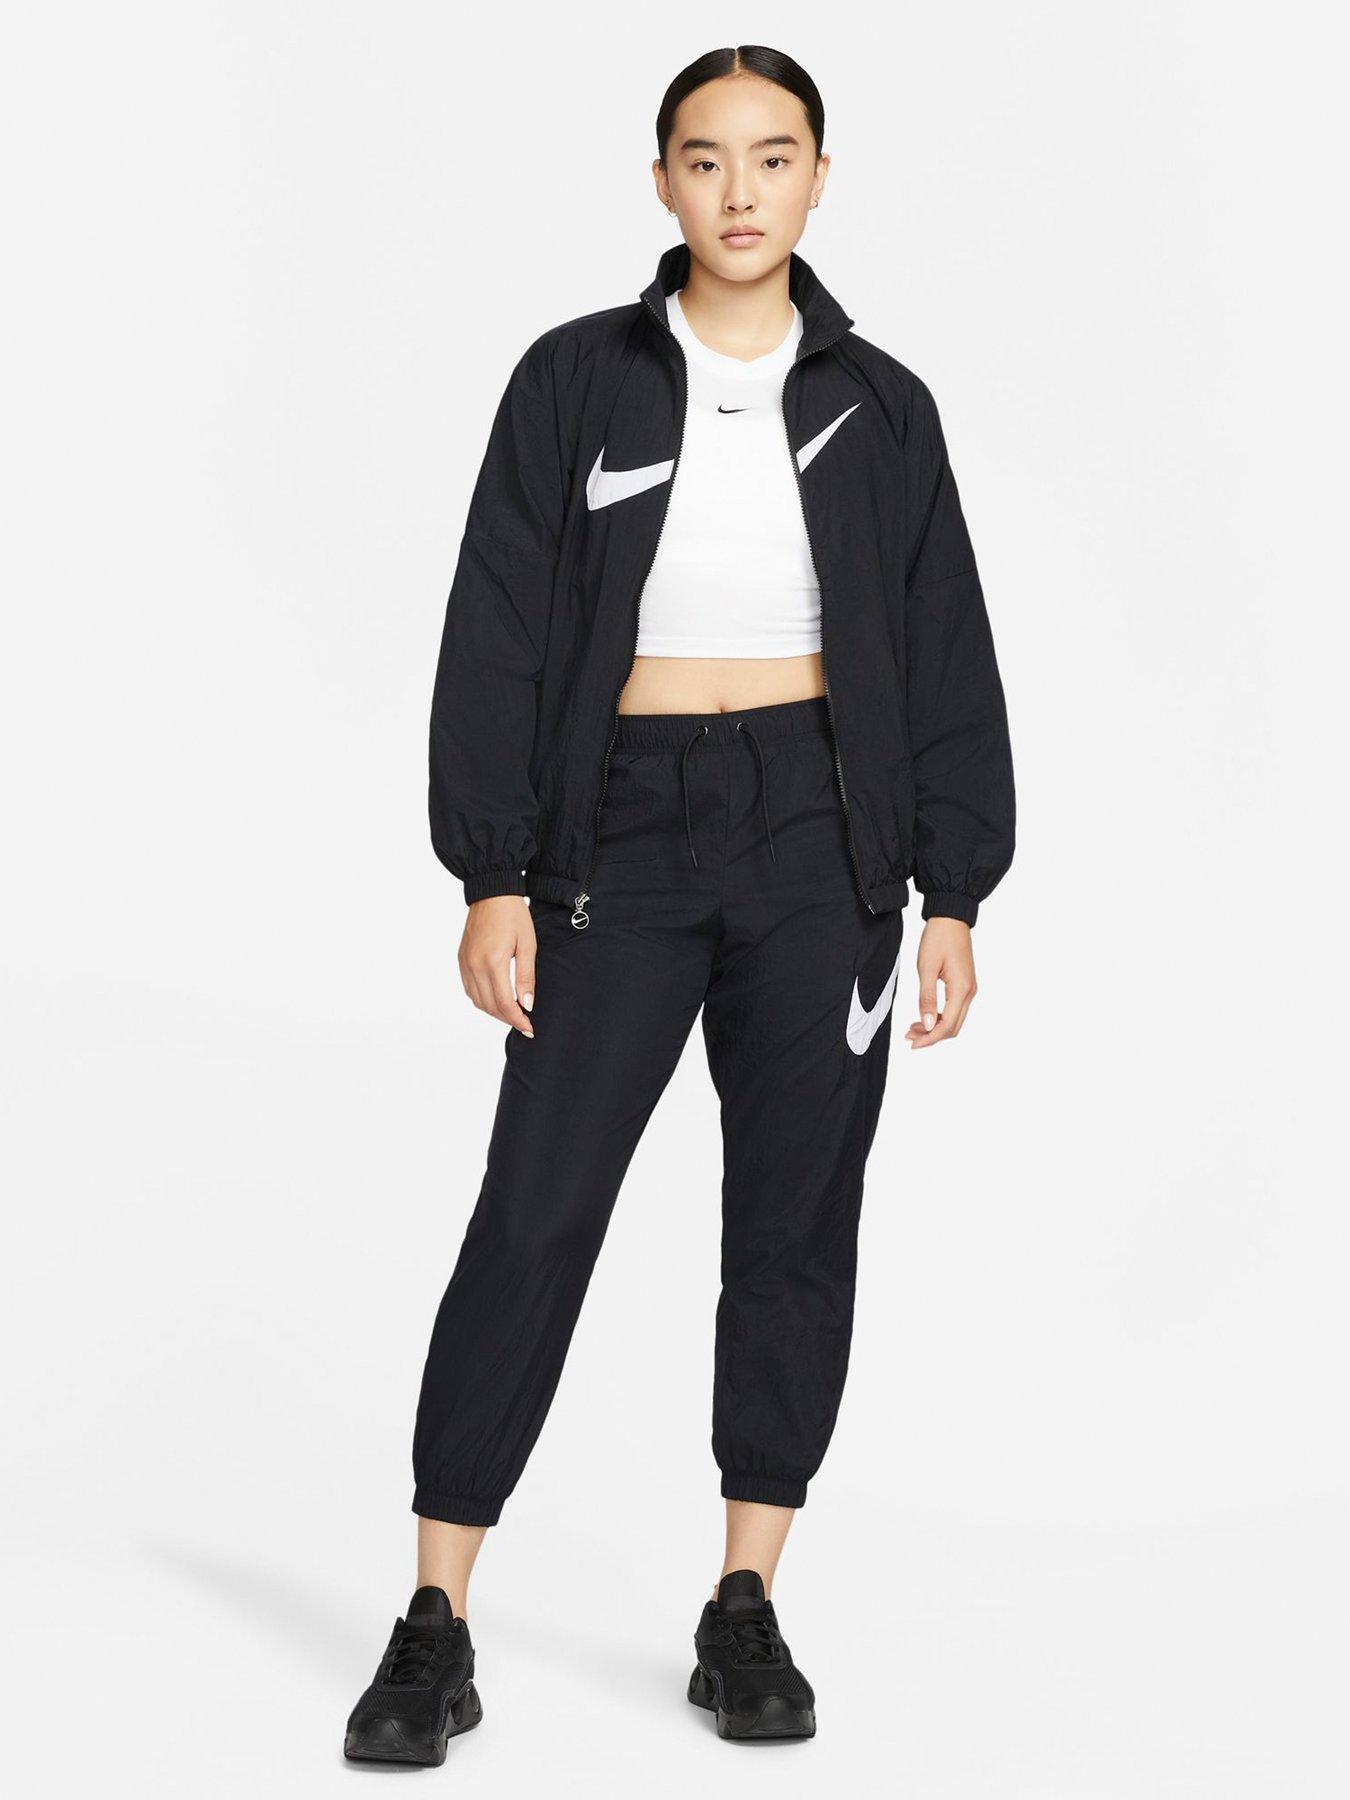 Nike Essential mid-rise woven cuffed pants in black